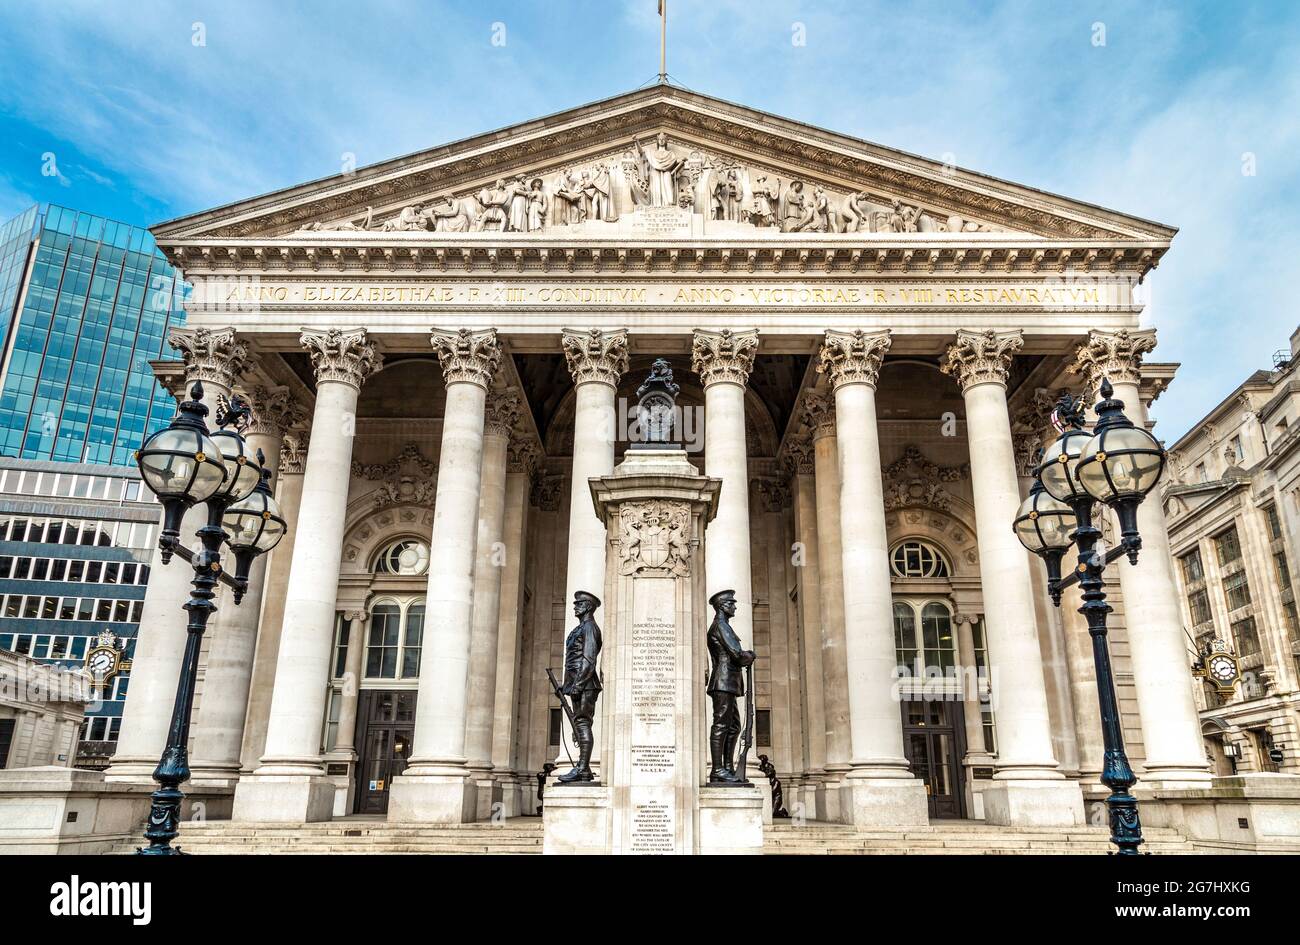 Exterior of the Royal Exchange building and the London Troops War Memorial, City of London, UK Stock Photo